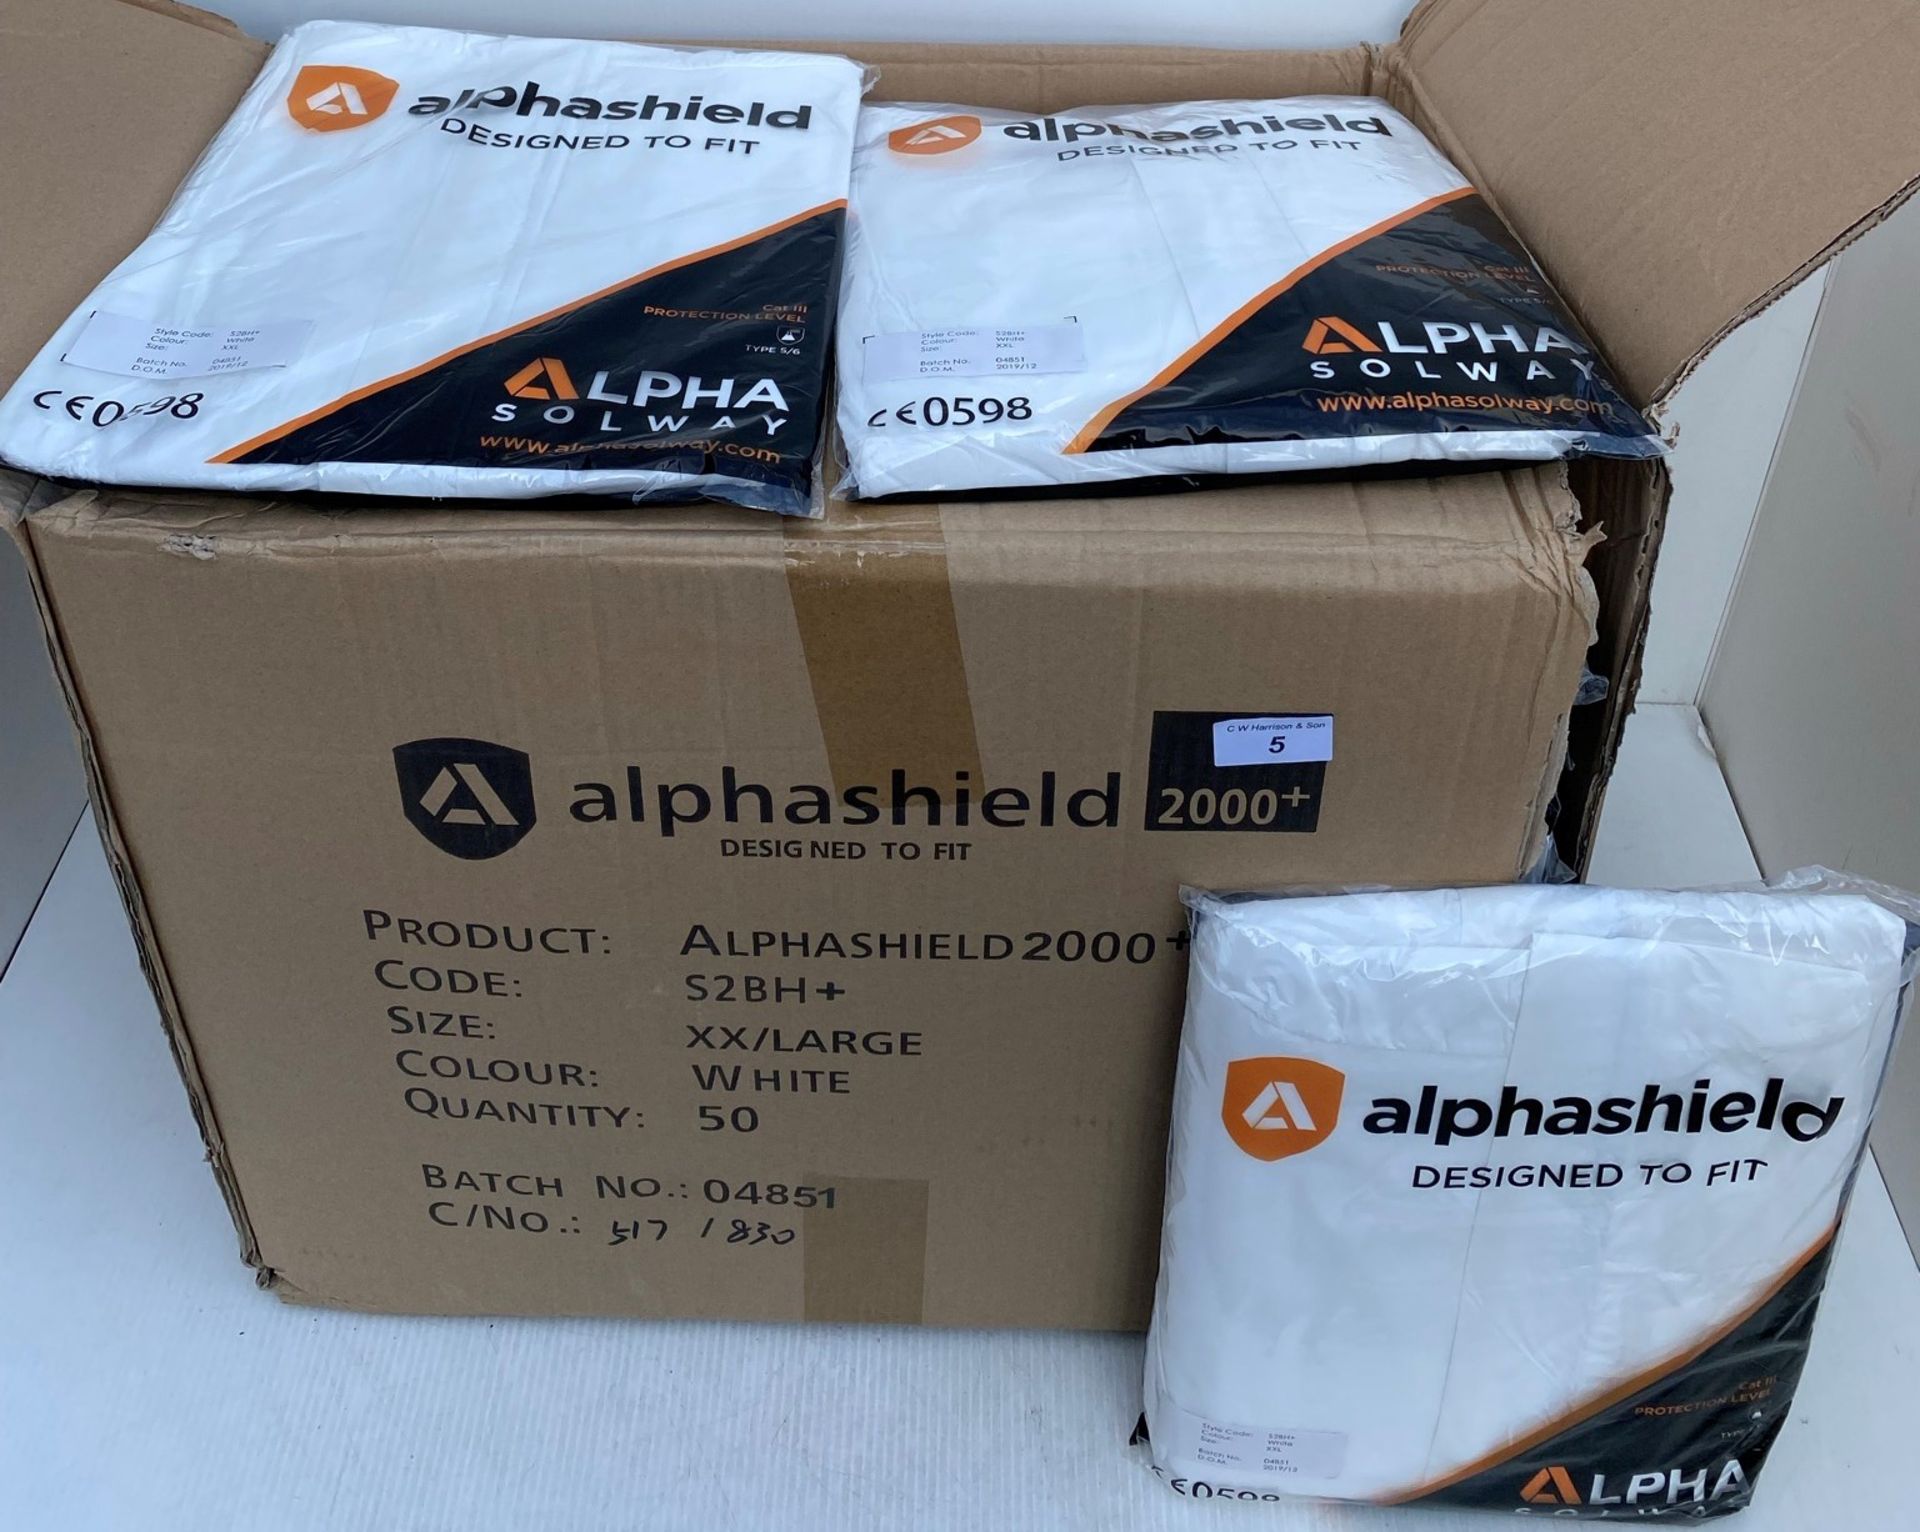 50 x Alpha Solway - Alphashield 2000+ protective S2BH+ white oversuits - Assorted sizes, - Image 2 of 3